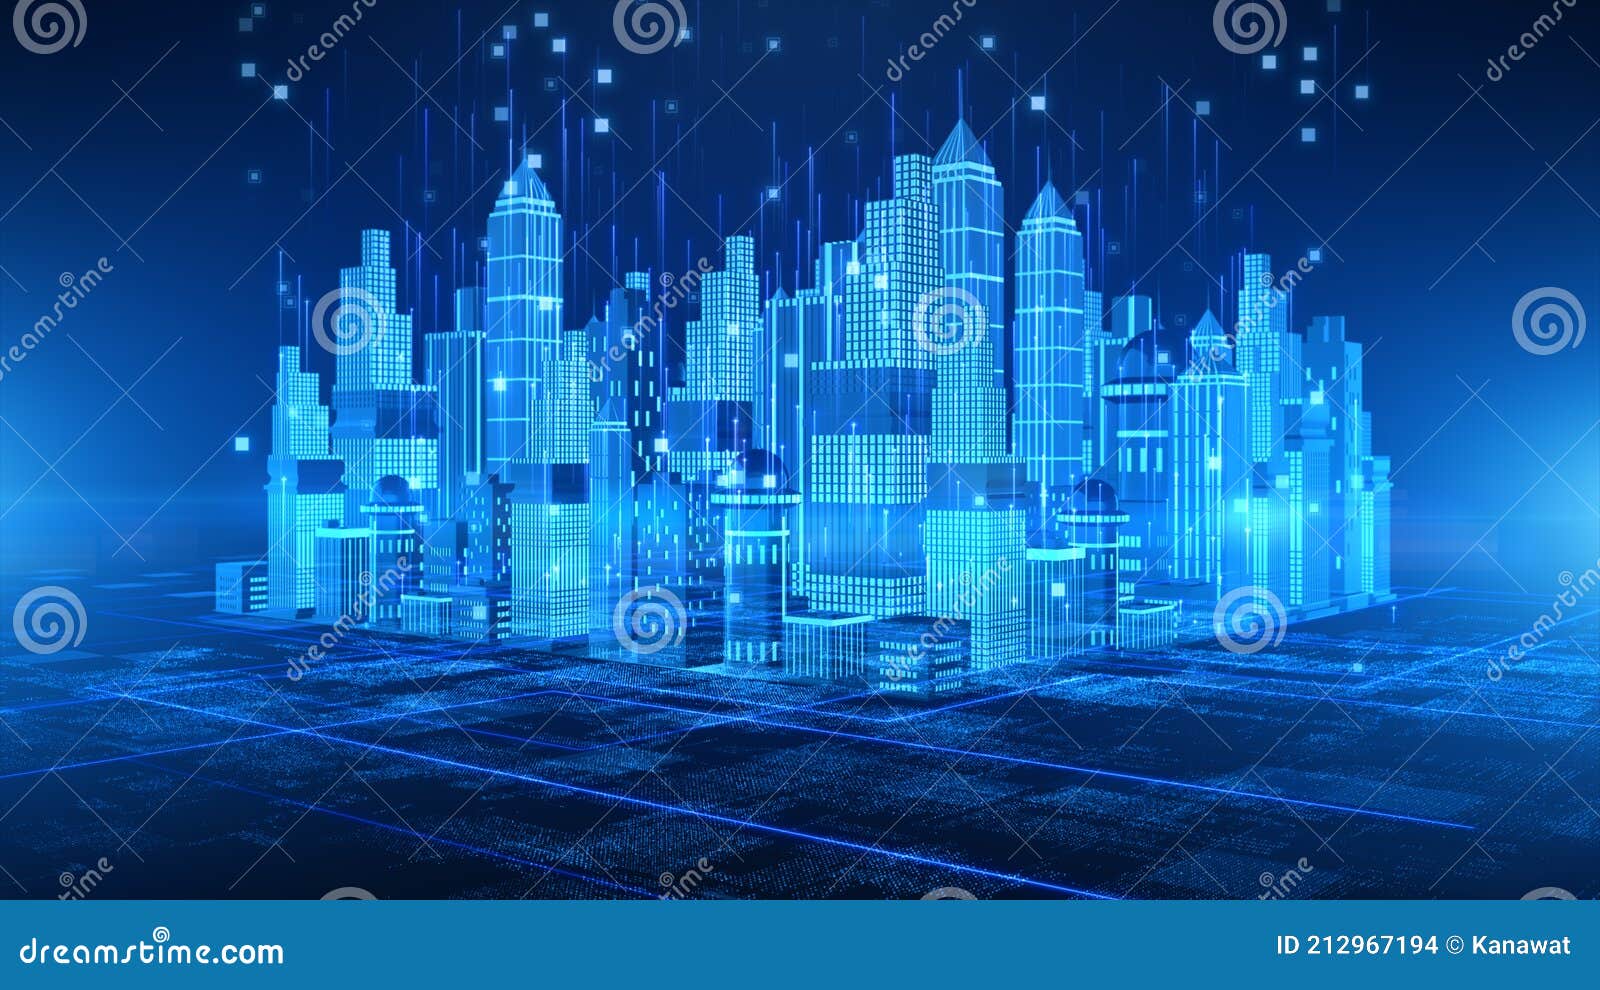 smart city with technology 5g communication. futuristic digital data network connected. internet of things background concept